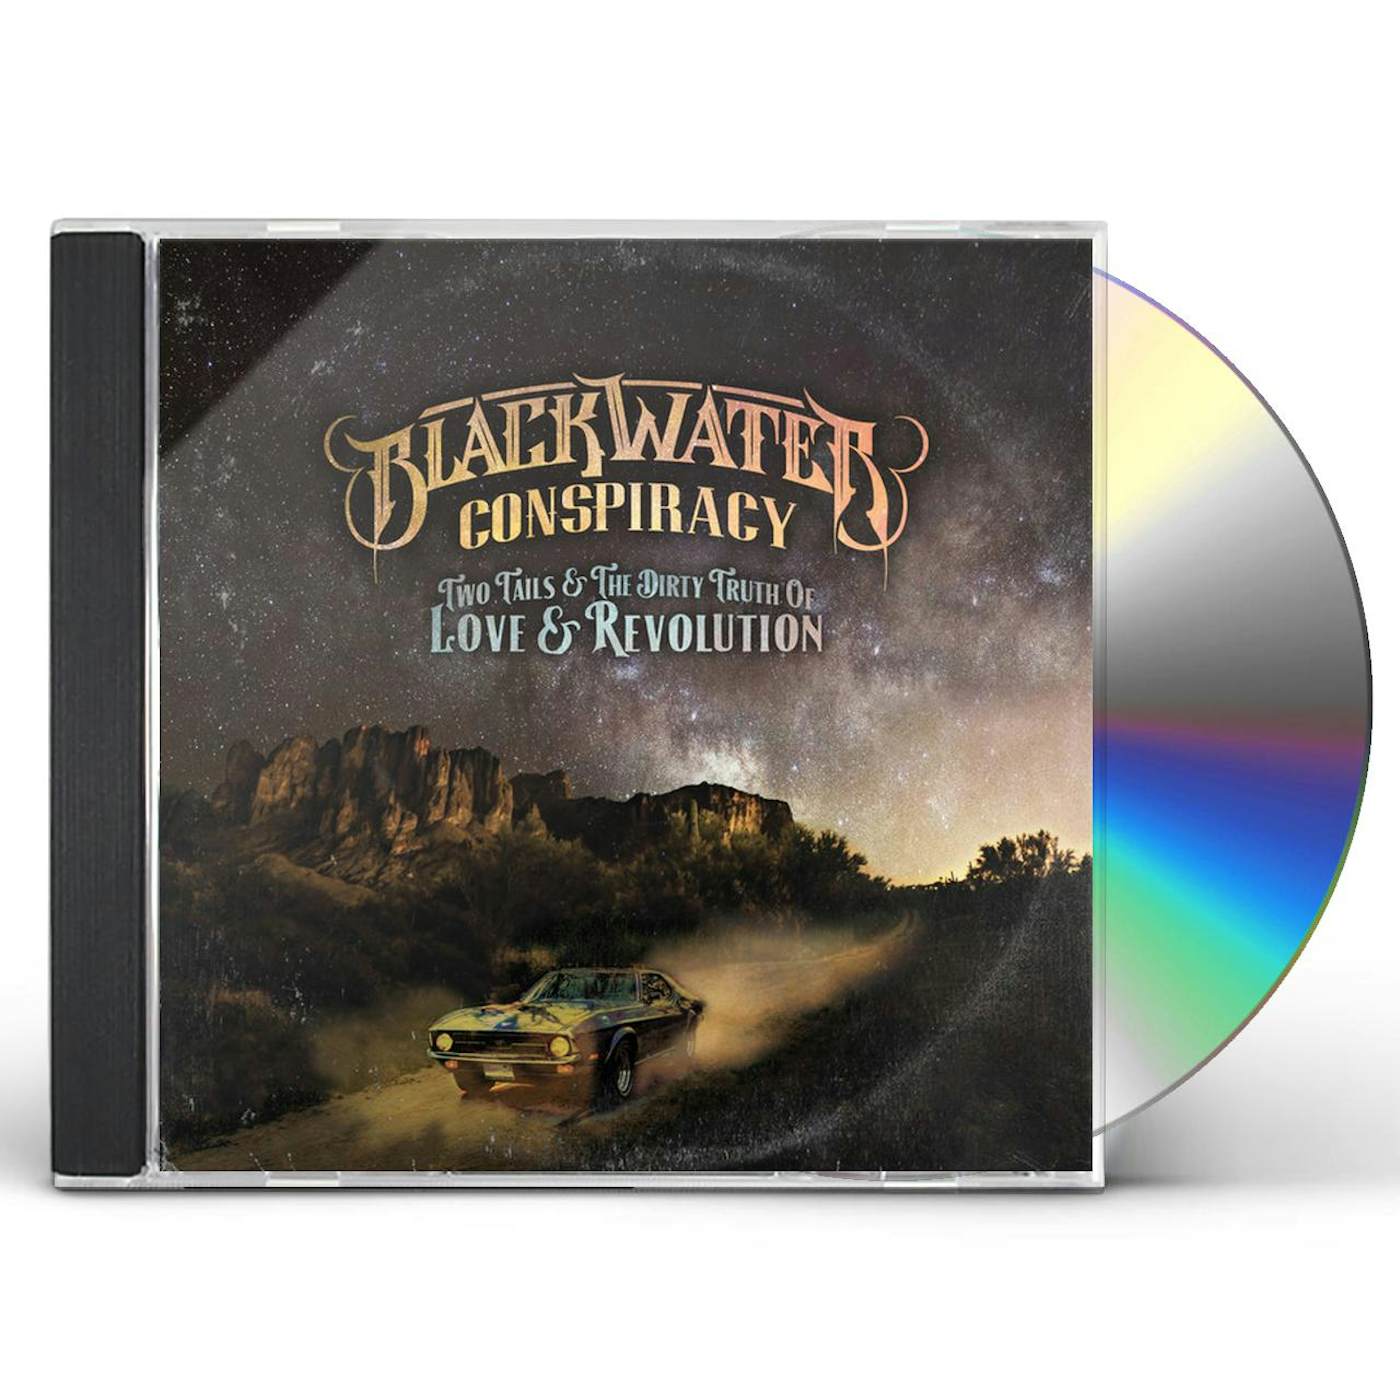 Blackwater Conspiracy TWO TAILS & THE DIRTY TRUTH OF LOVE & REVOLUTION CD